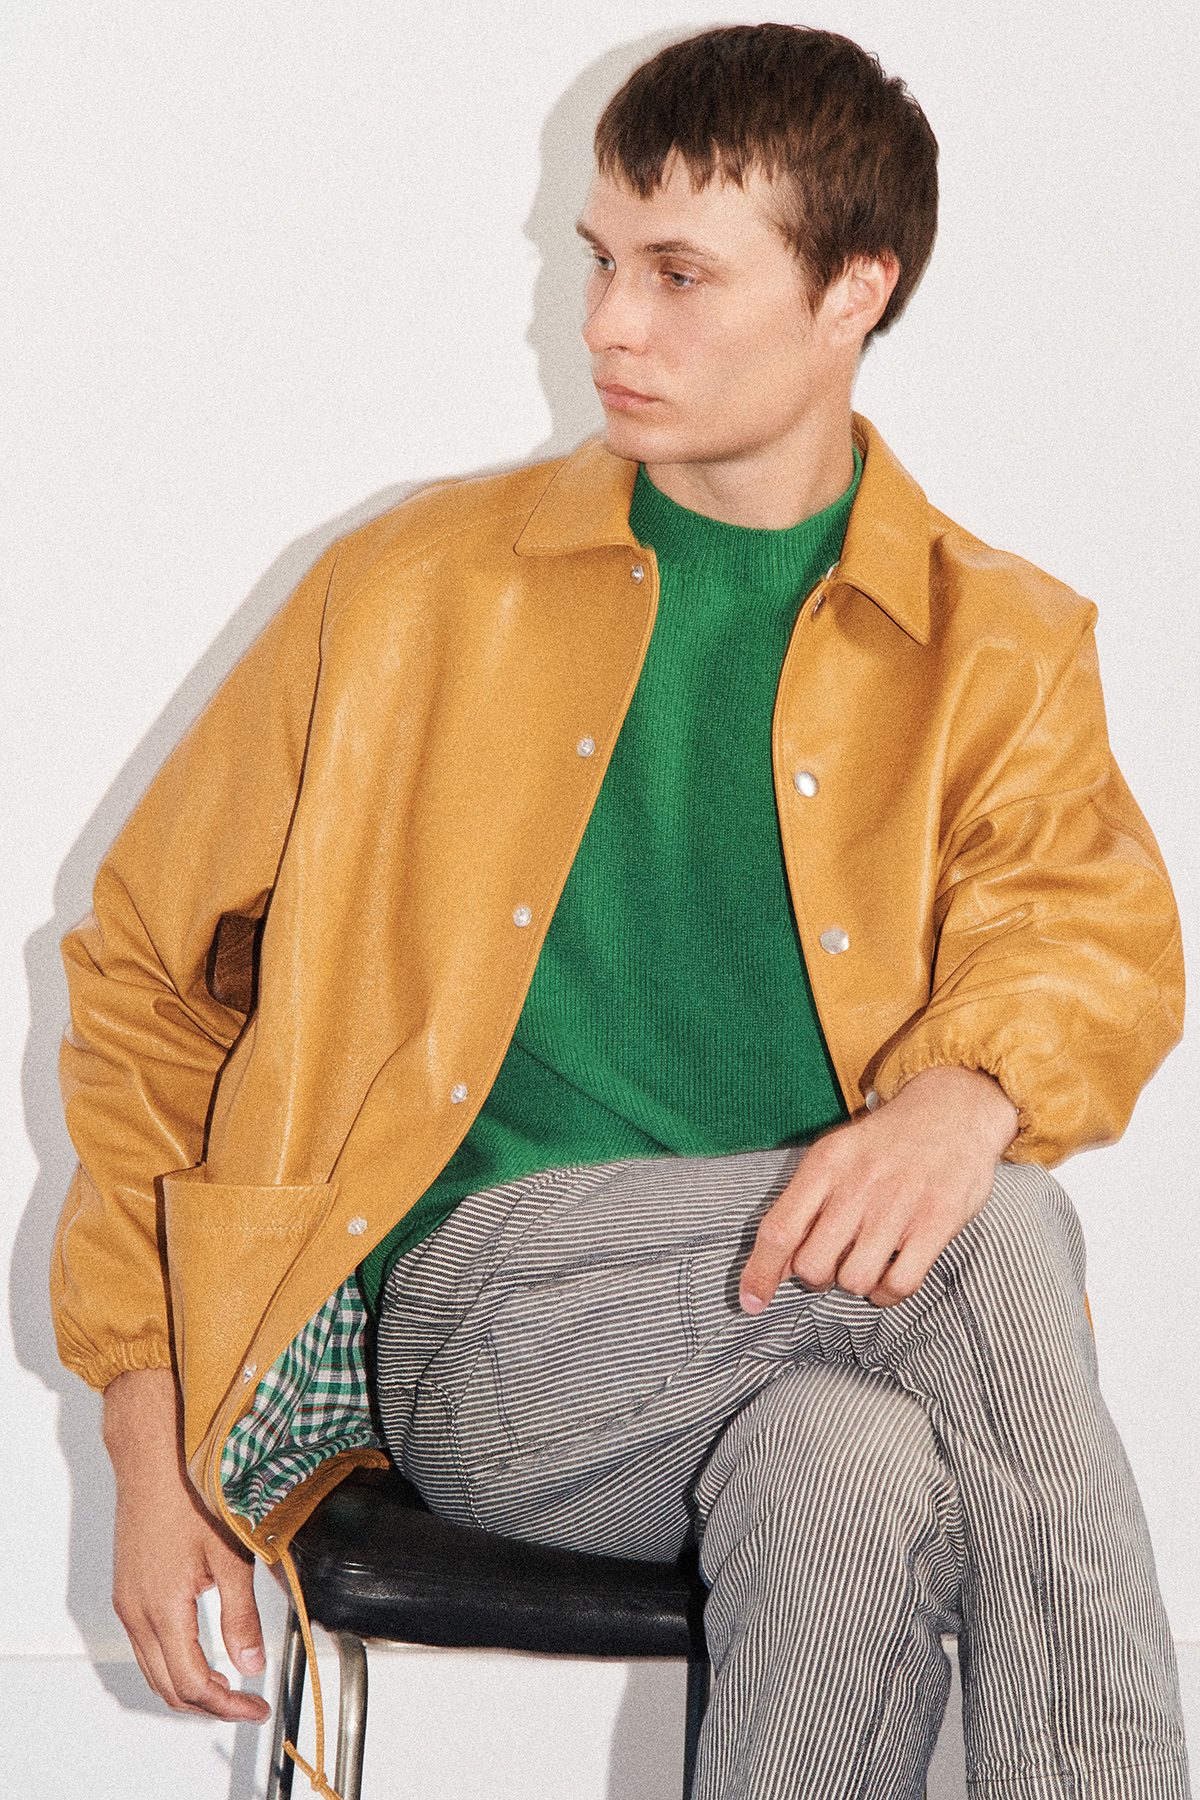 YMC References '80s Post-Punk Style For Clashing SS20 Offering